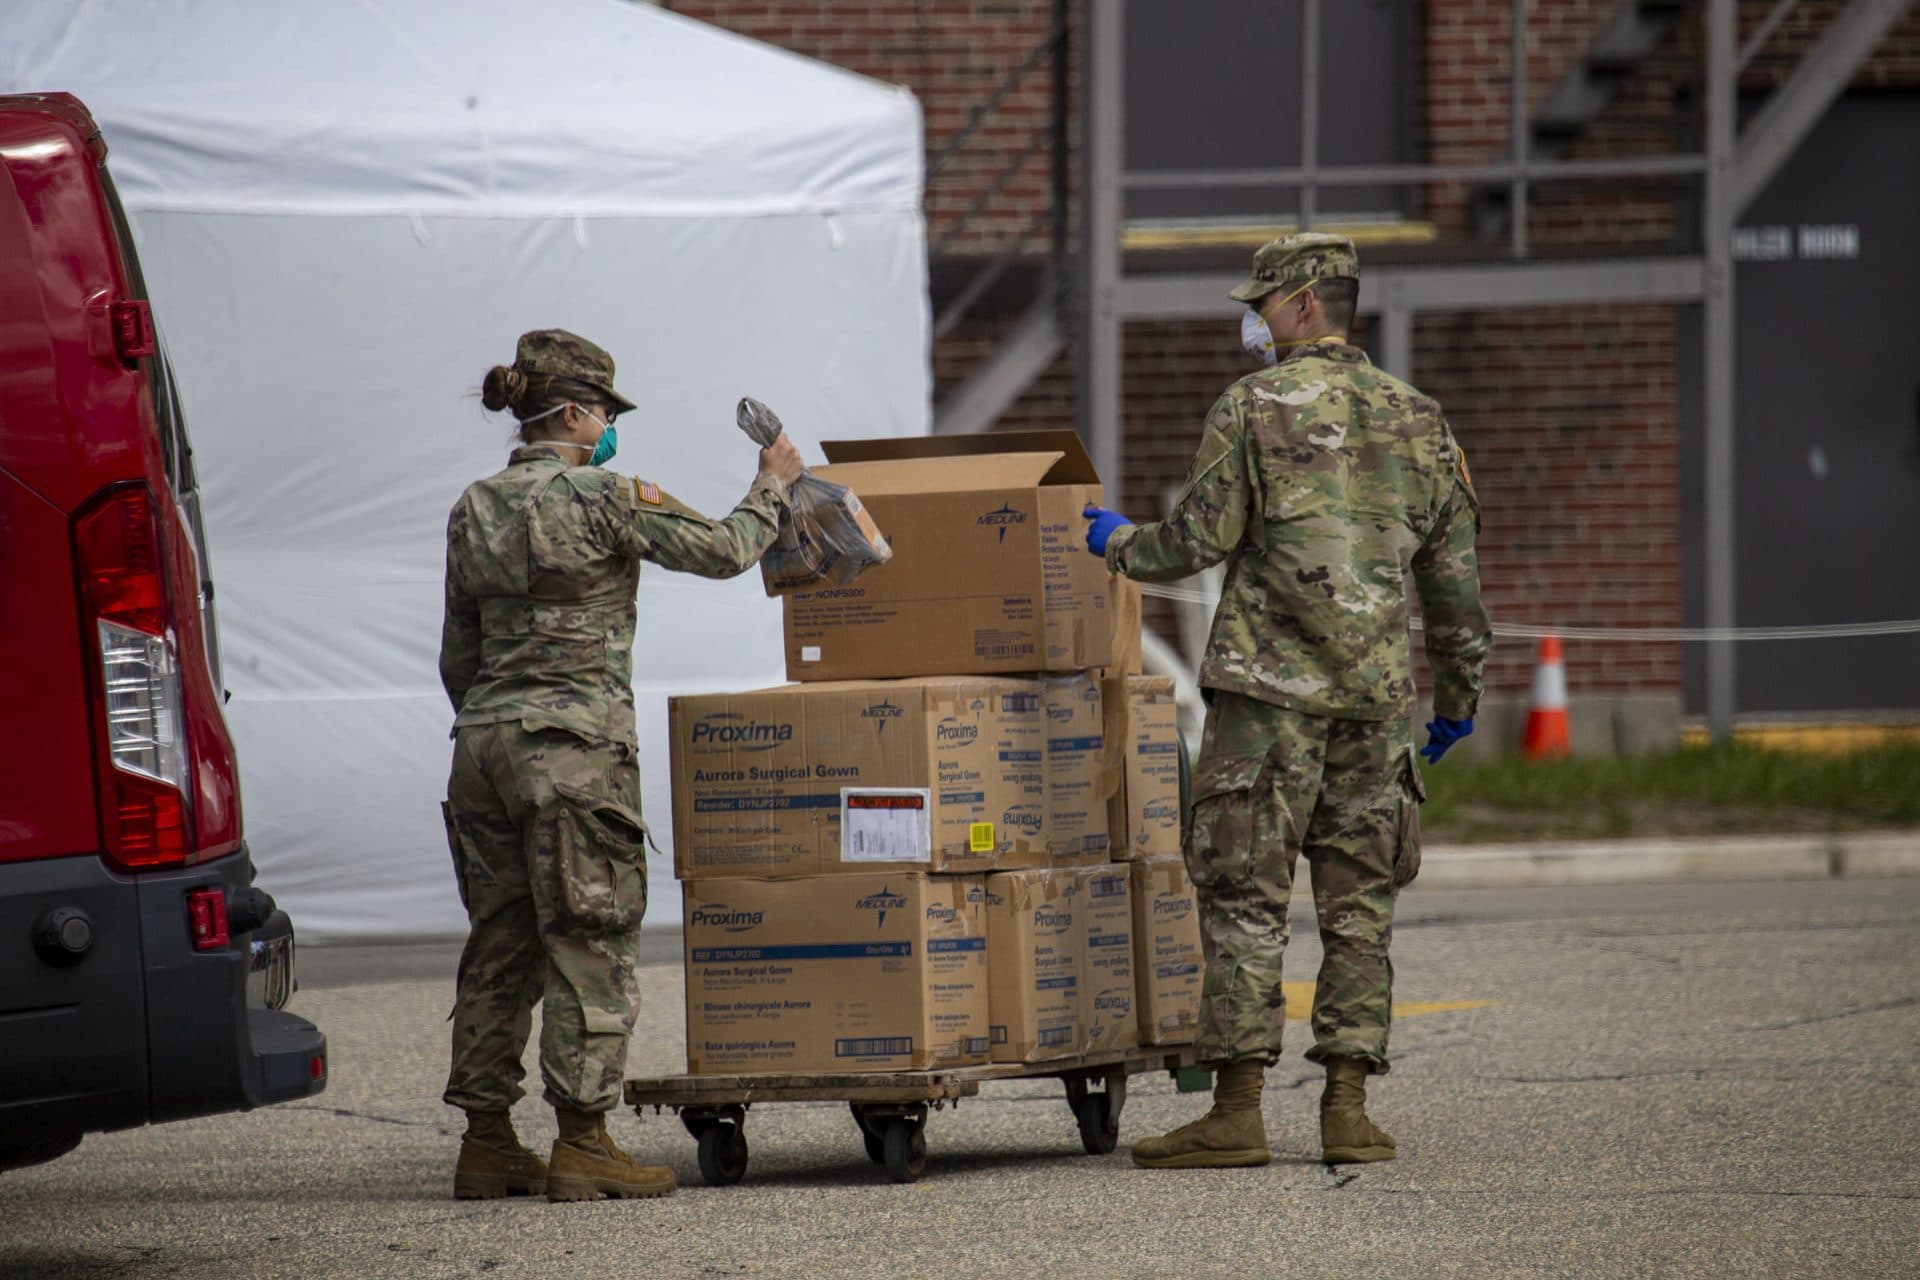 Members of the National Guard load boxes of protective gear onto a cart at the Soldiers’ Home on March 31. (Jesse Costa/WBUR)